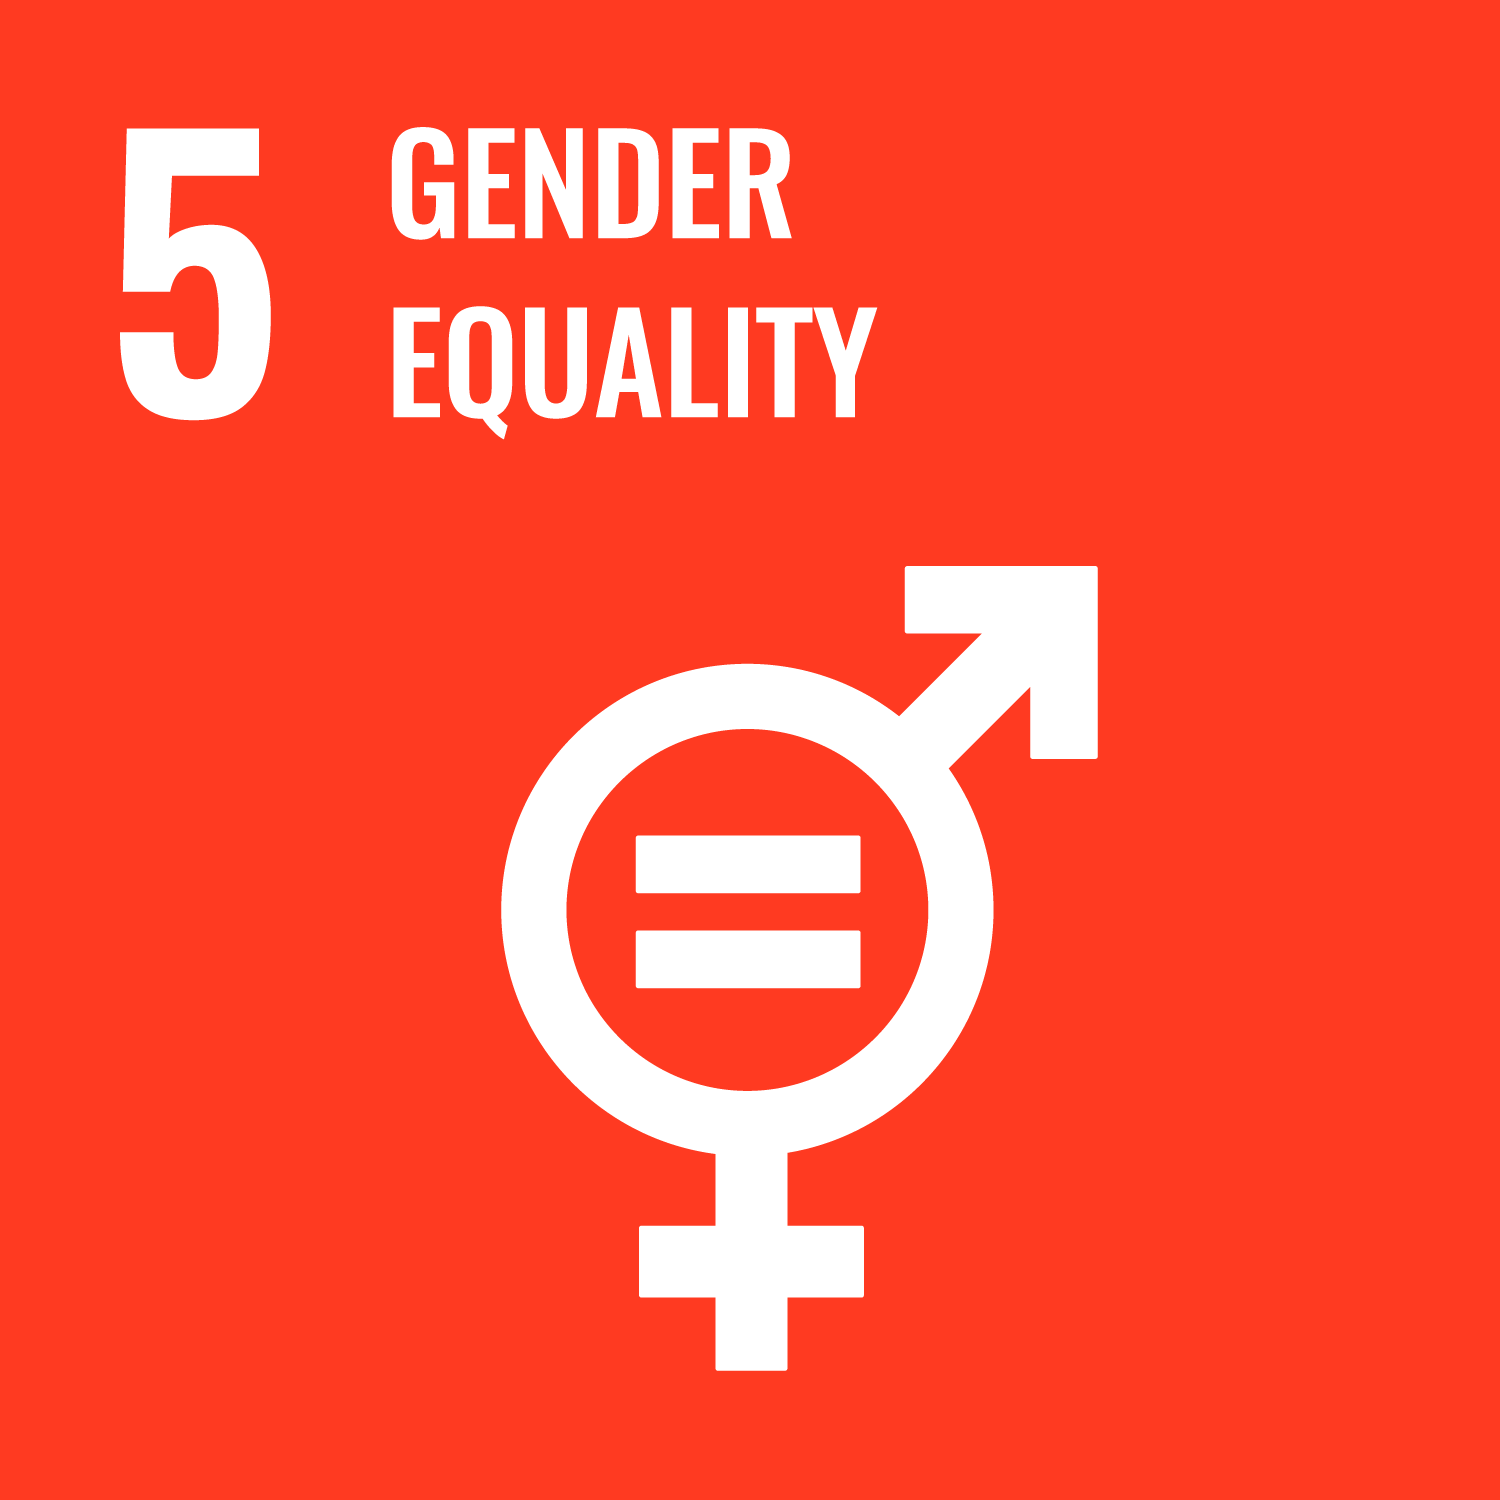 UN Compact Goal 5 Gender Equality